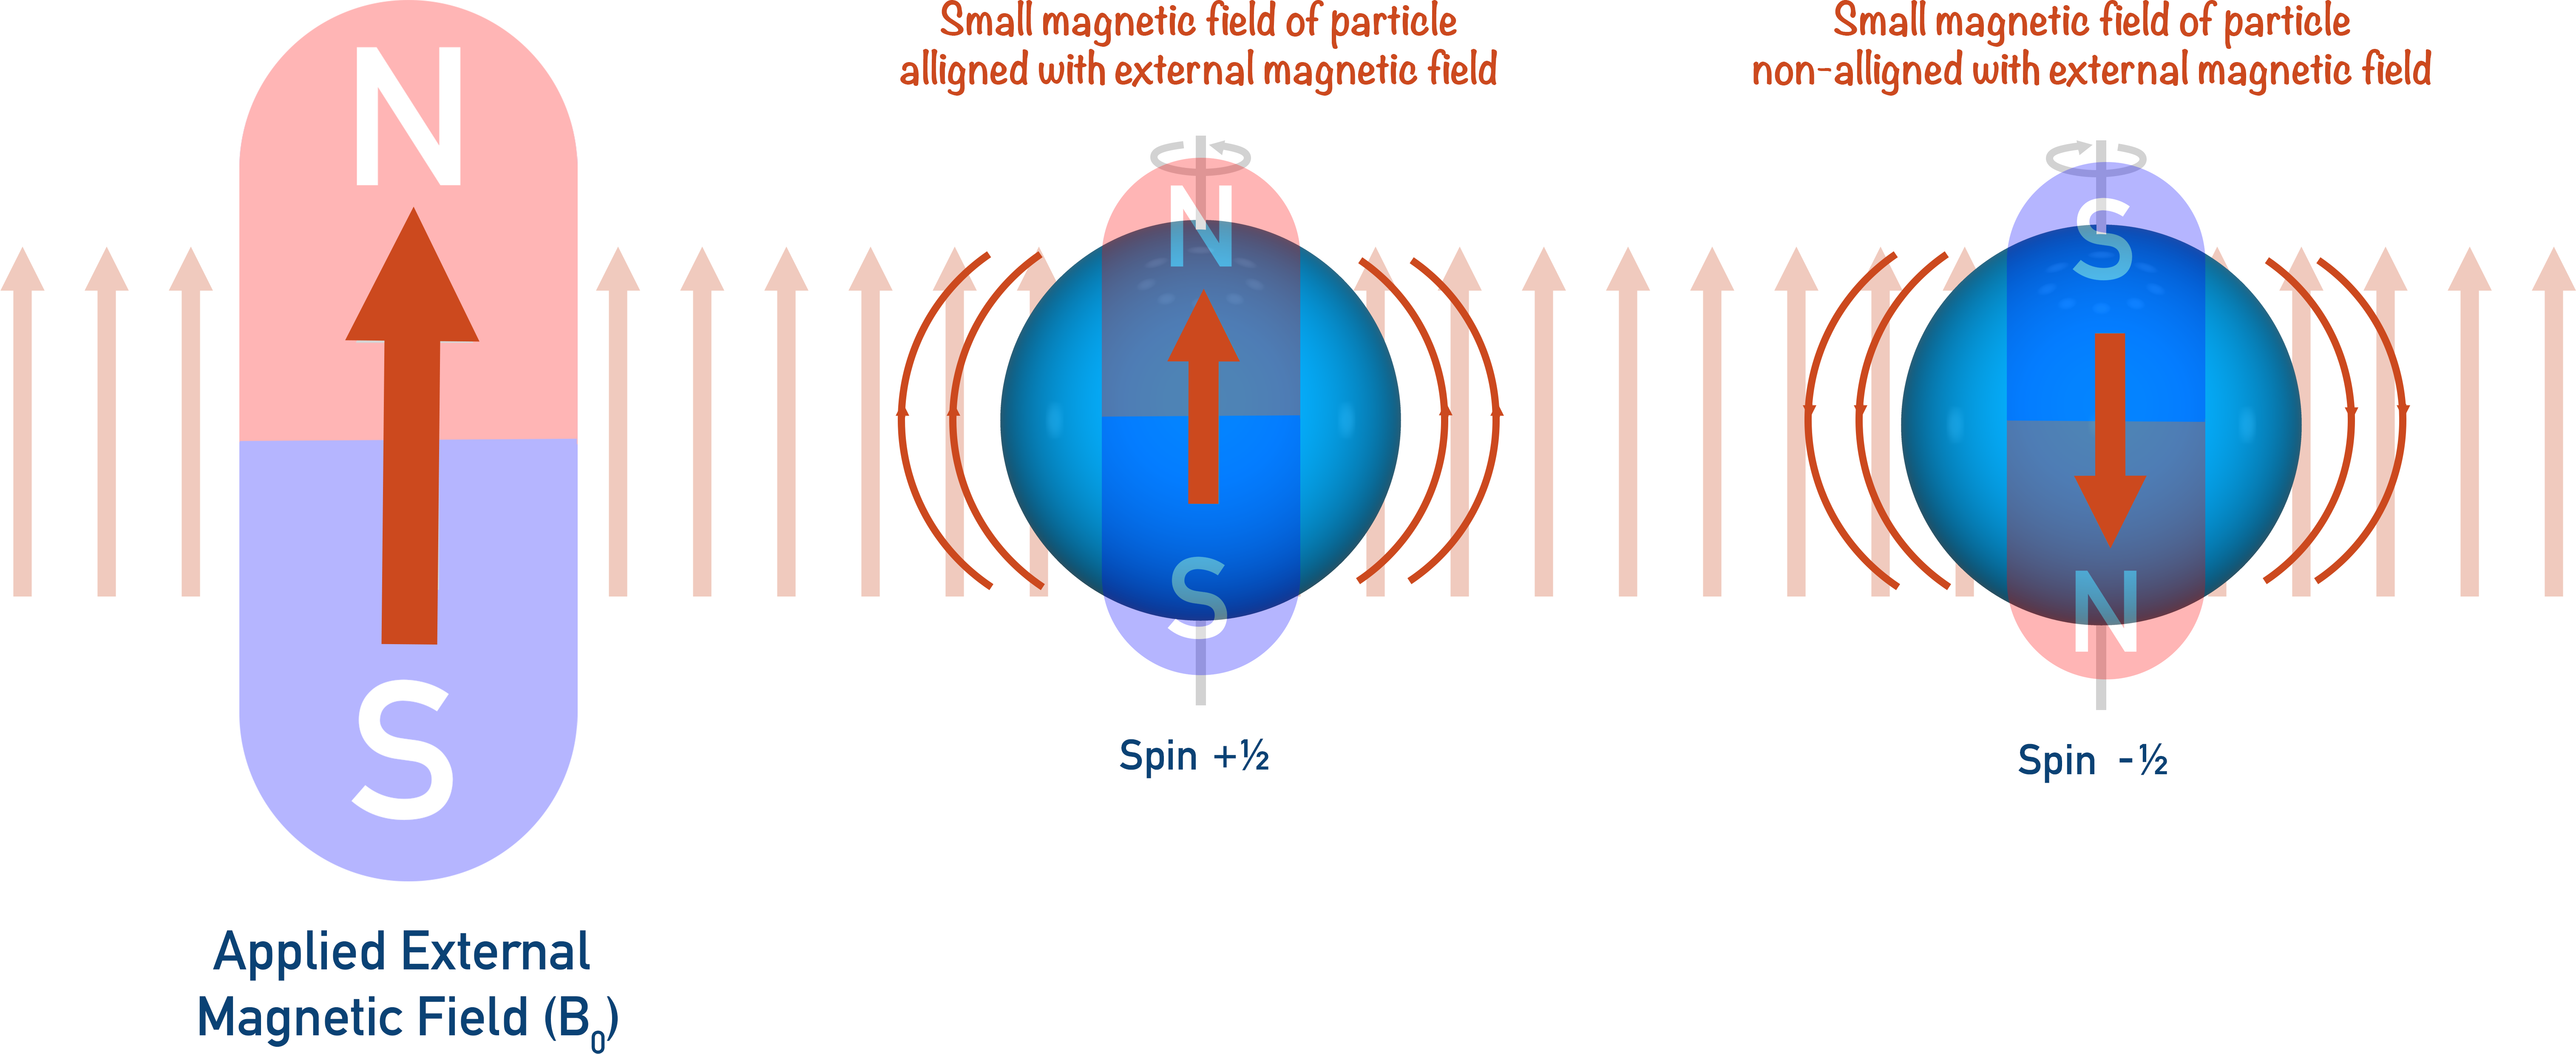 NMR spectroscopy aligning particle magnetic fields with external field